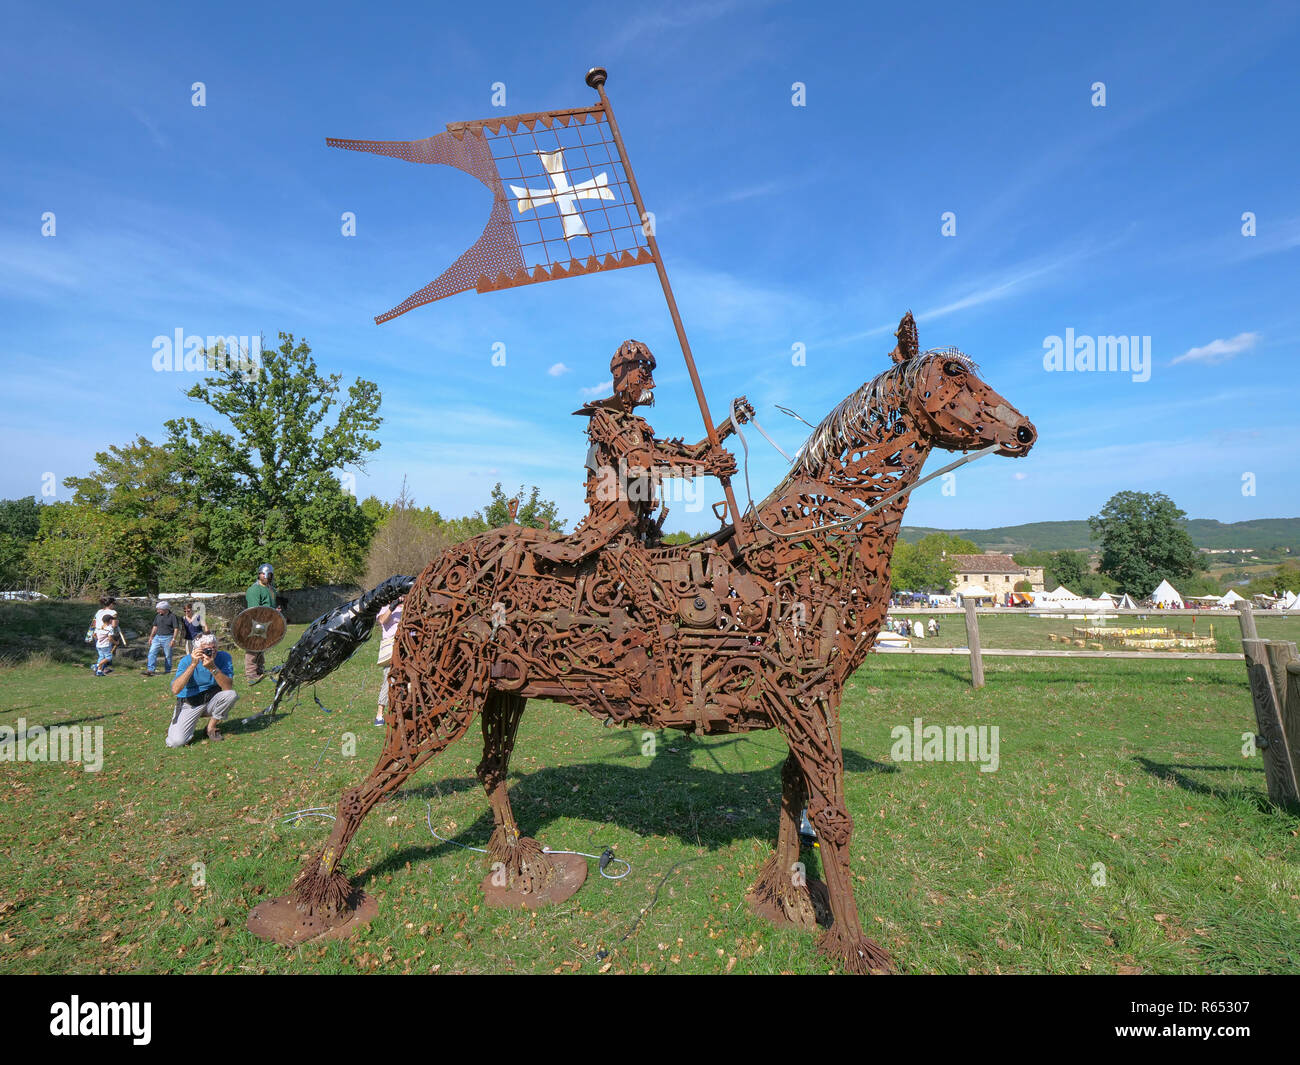 Knight carrying Crusader flag, all made from scrap metal and nuts and bolts, at Medieval fair at Chateau de Lagarde, near Mirepoix, southern France Stock Photo